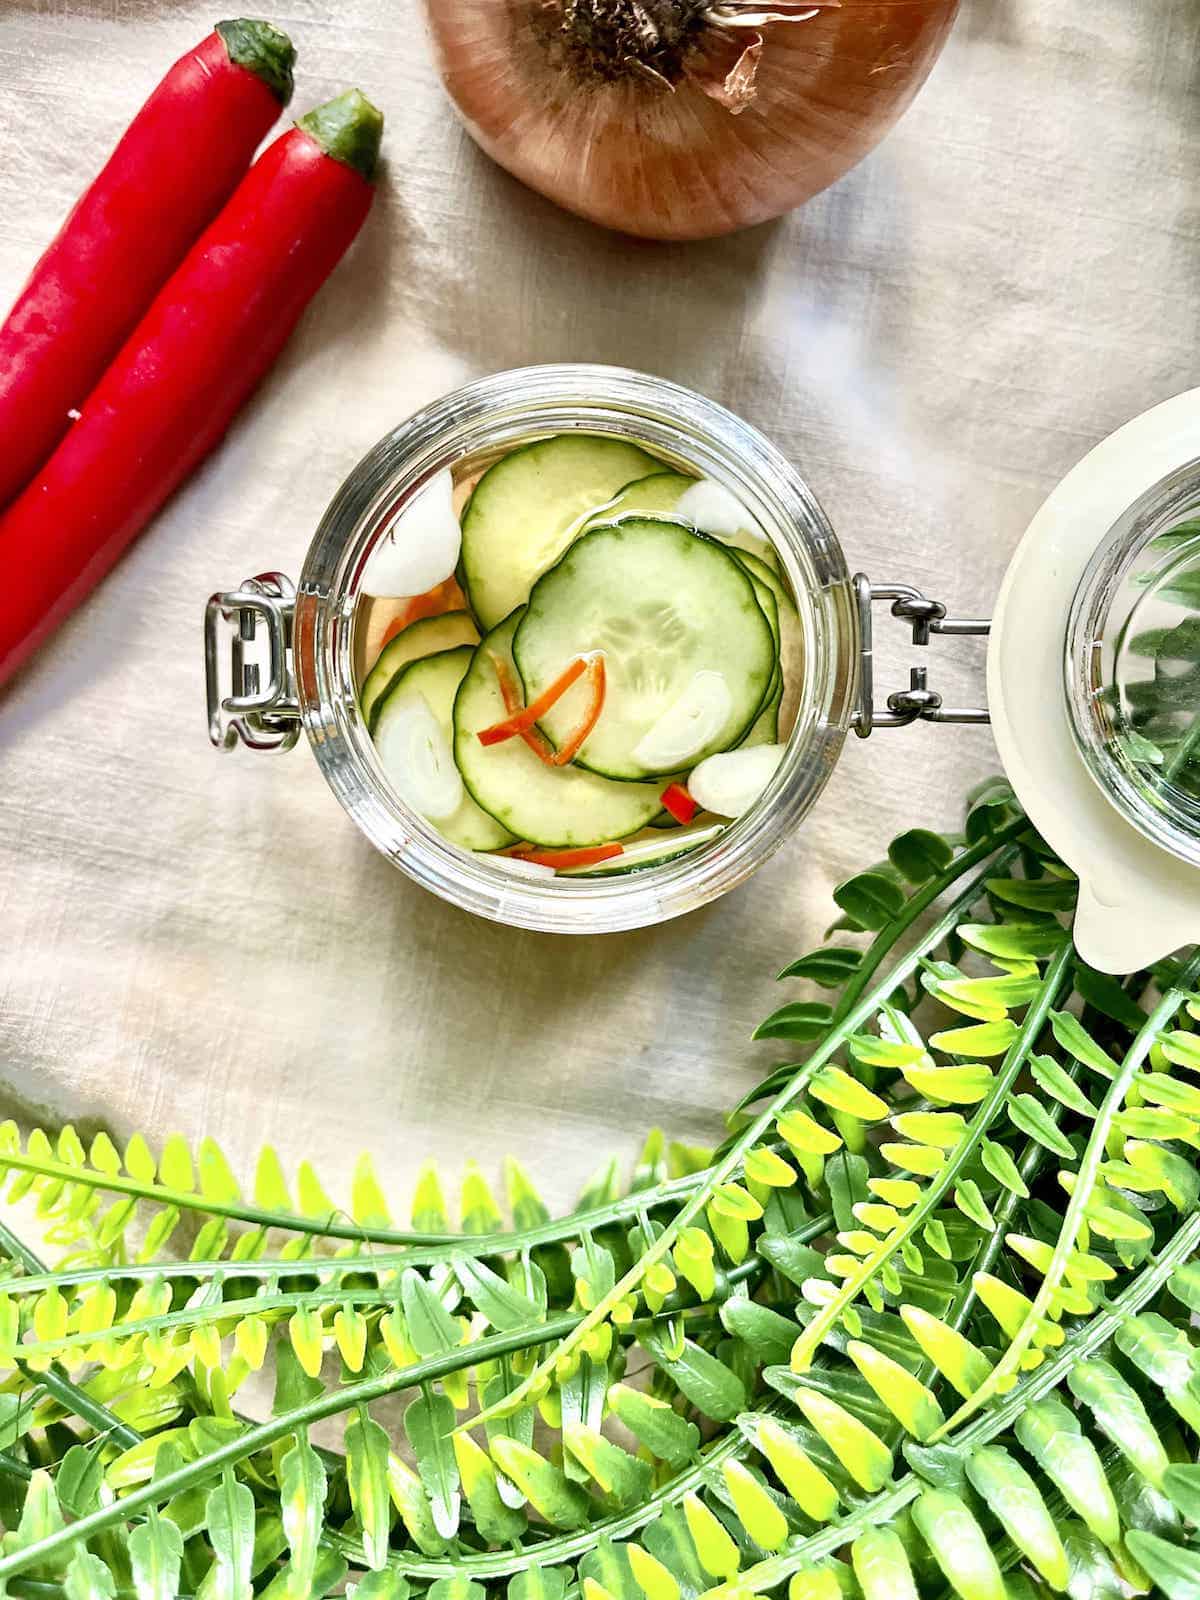 Overhead shot of thinly sliced cucumbers and red chillies in a glass jar.